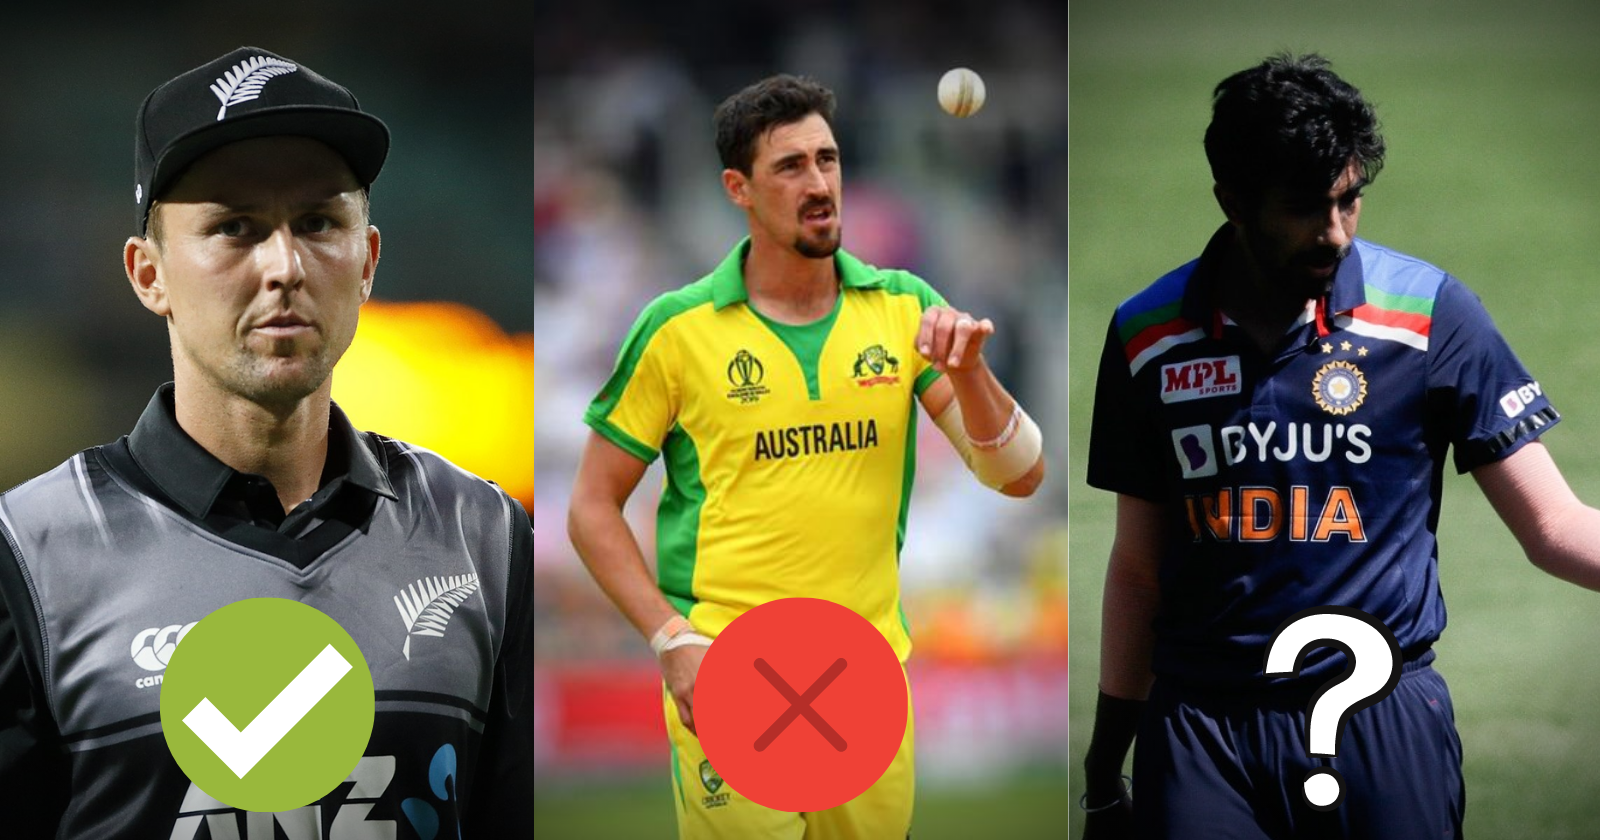 ICC T20 World Cup 2021: 5 Players Who Can End Up As The Highest Wicket-Taker